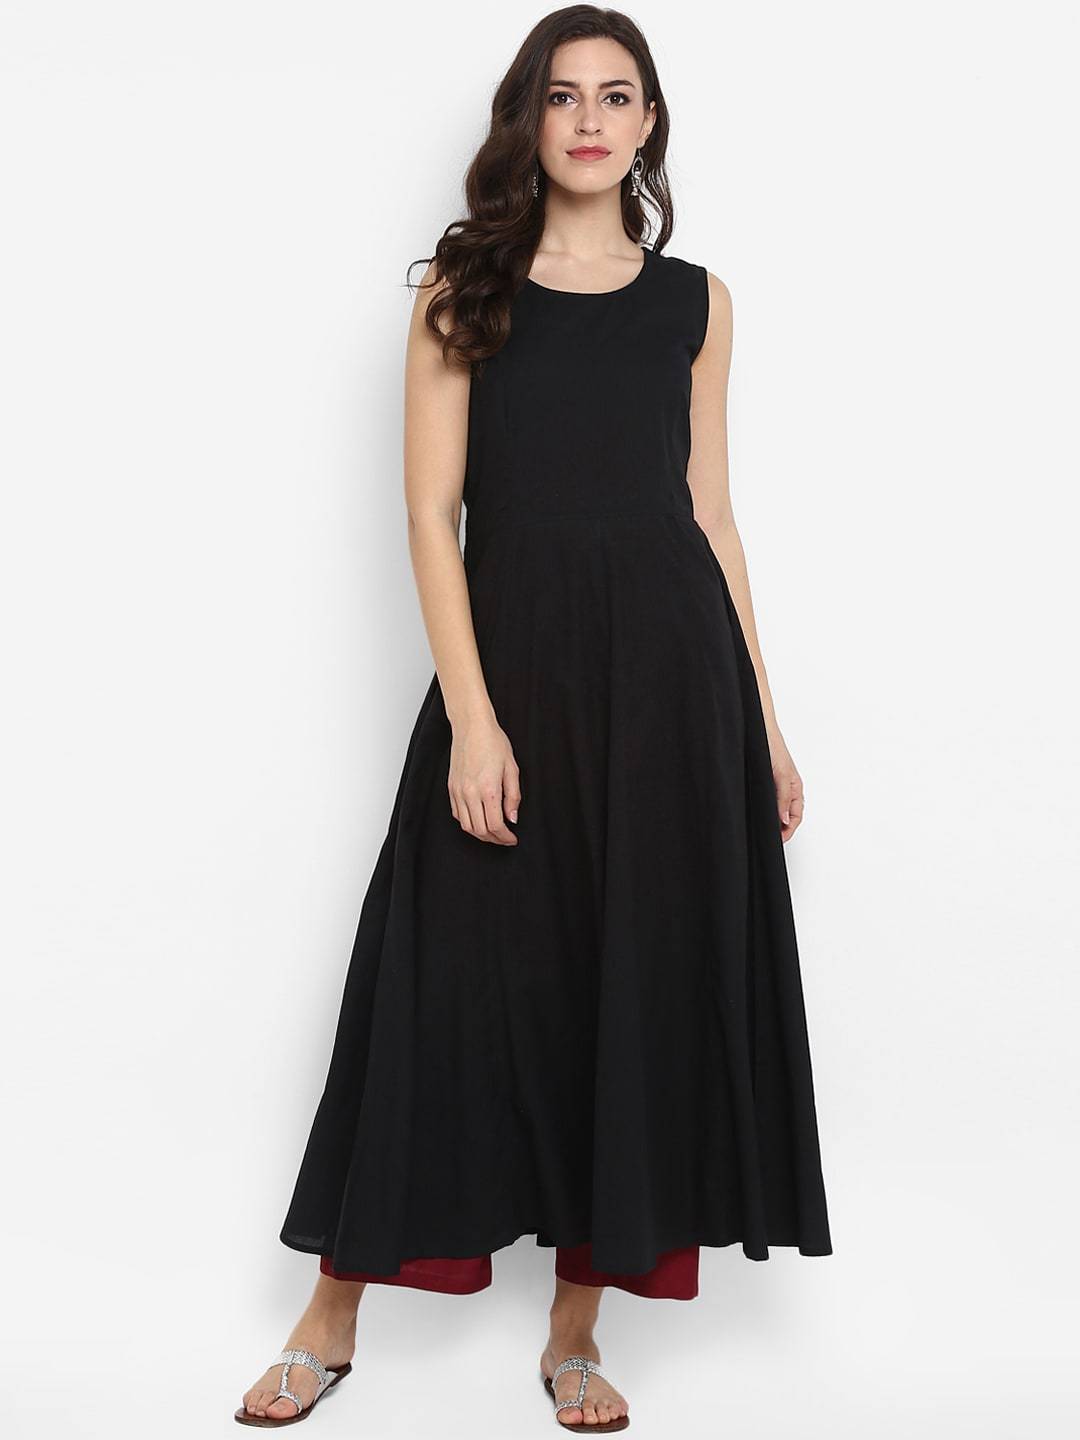 Women's Black Solid Fit and Flare Dress With Shrug - Meeranshi